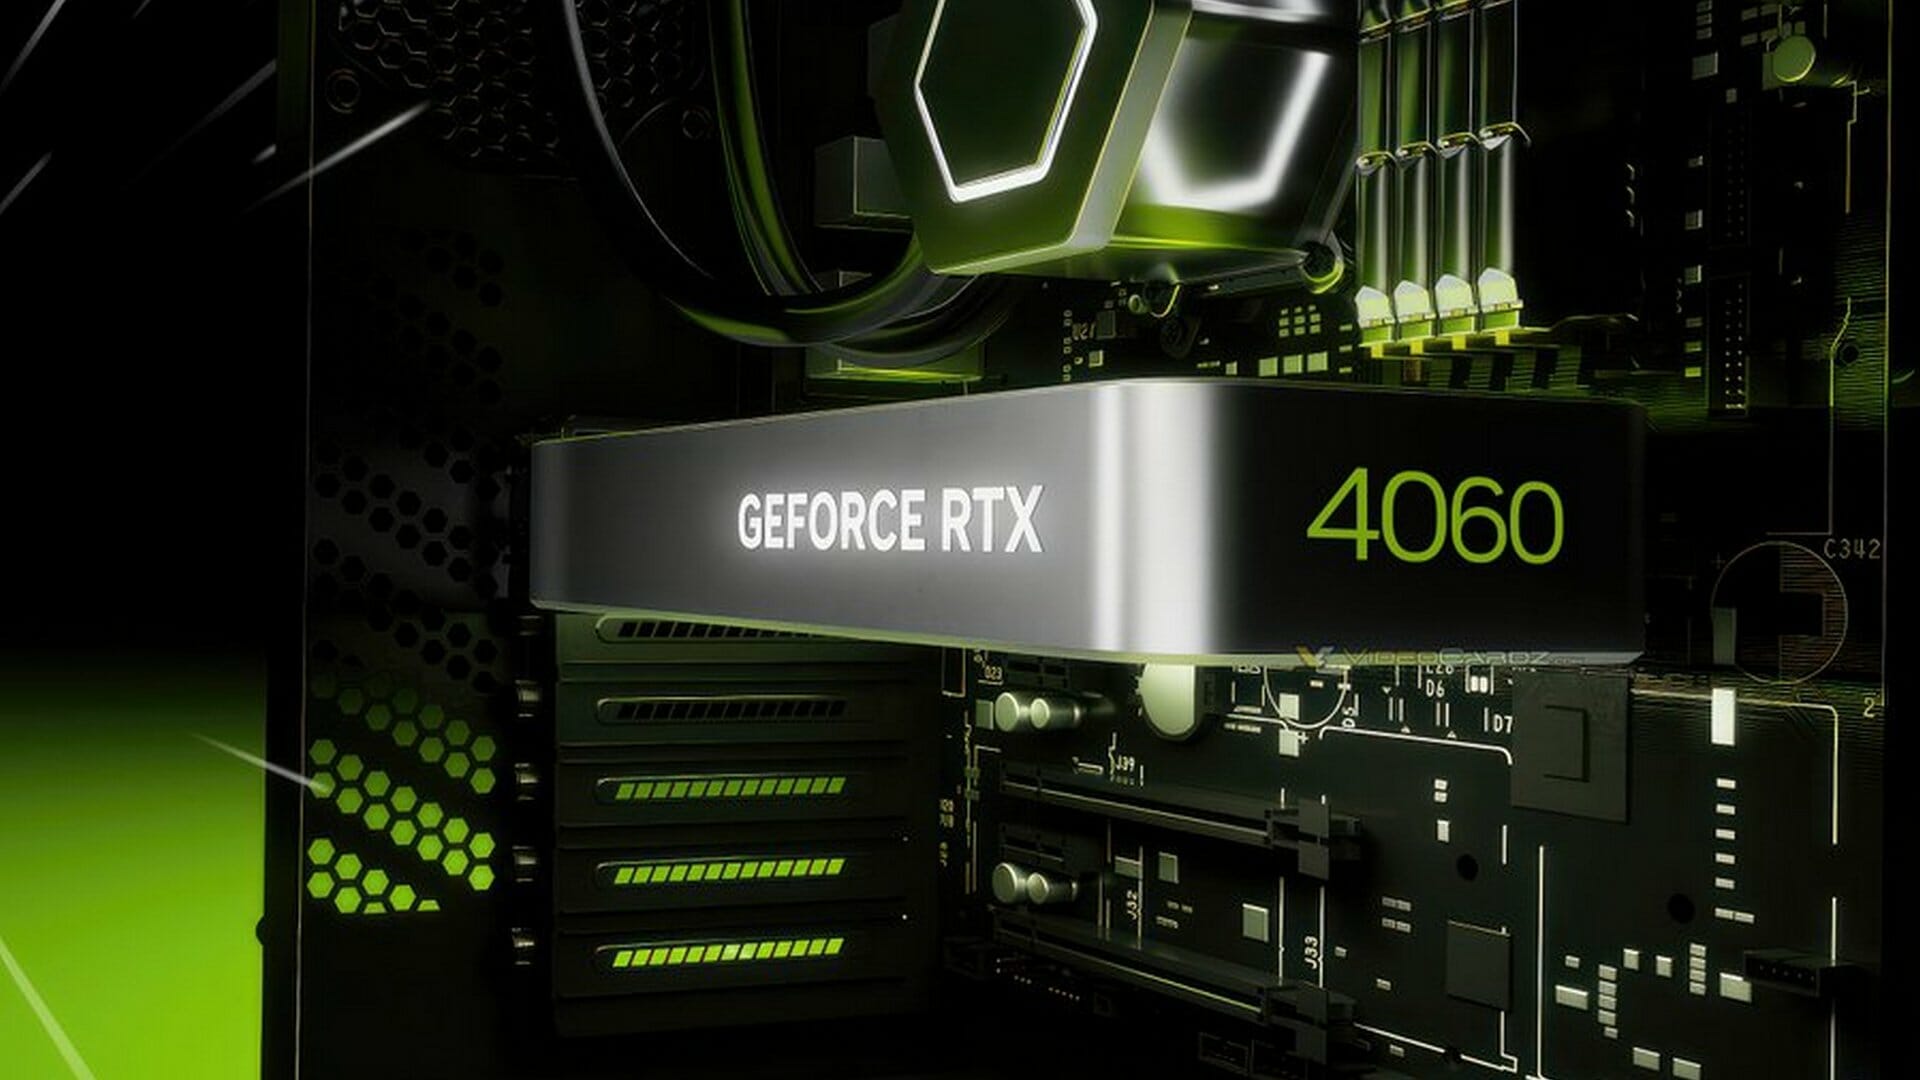 GeForce RTX 4060 8 GB test results. What is a $299 video card 